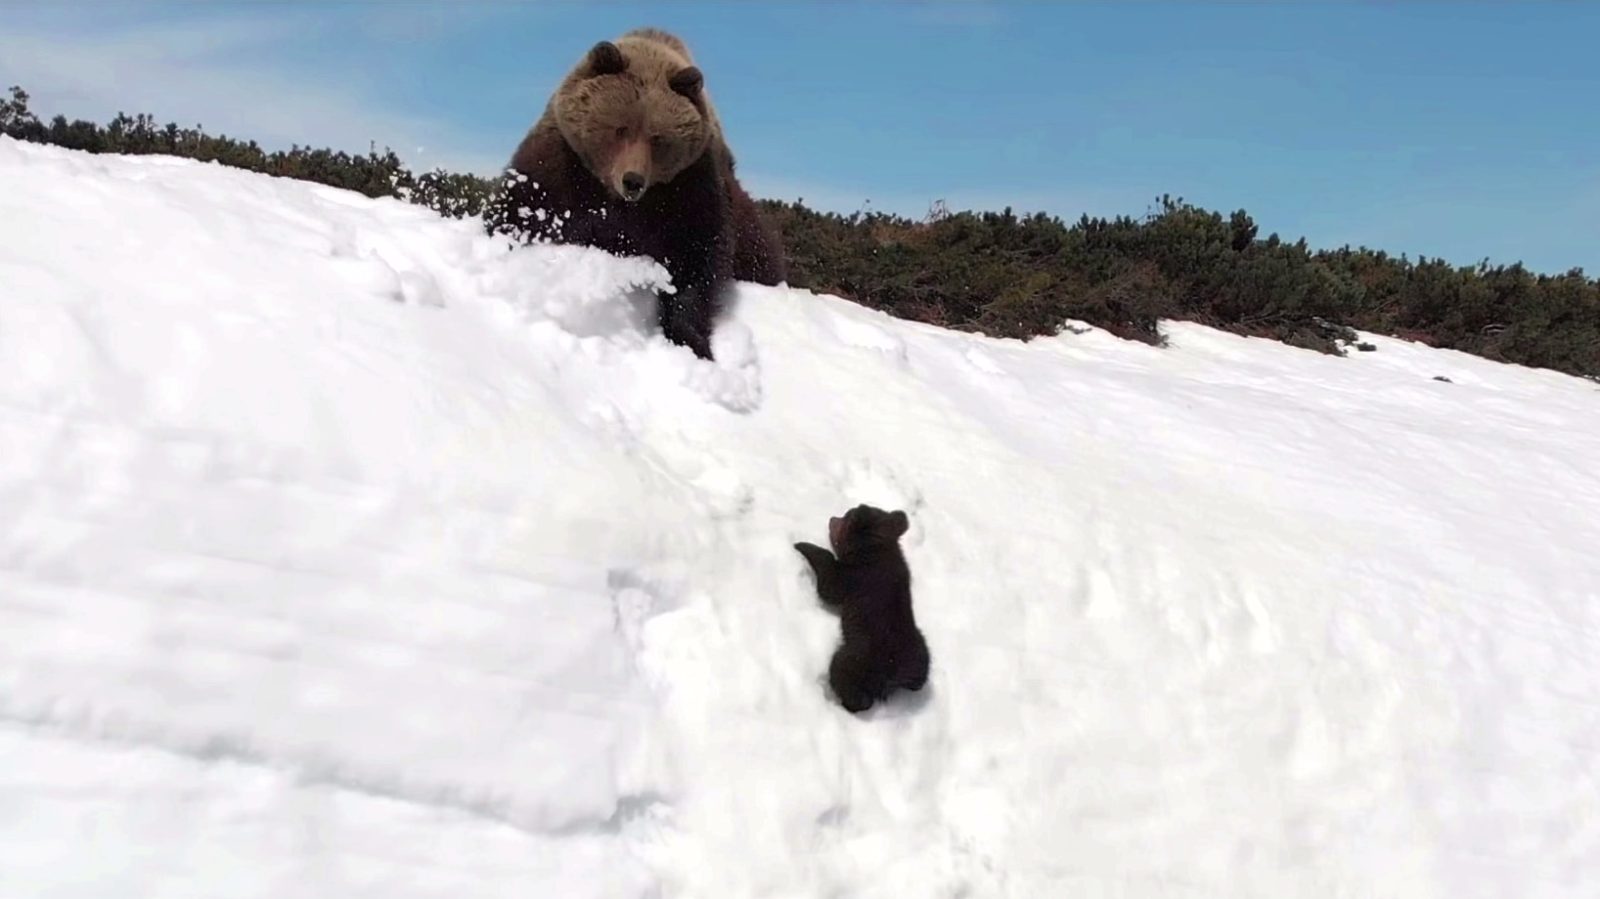 Experts comment on viral bear video captured with a drone